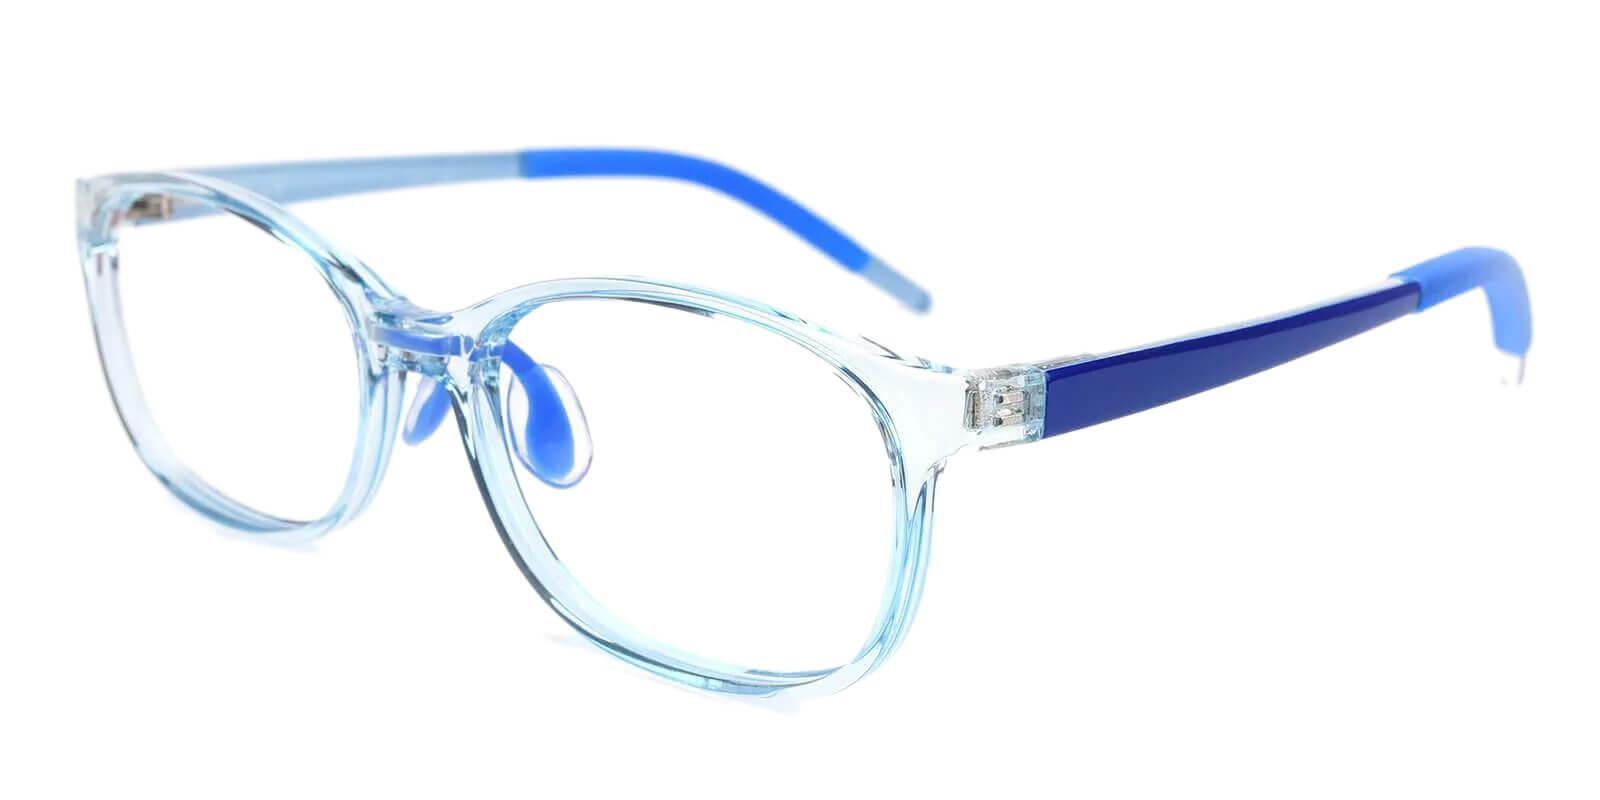 Kids-Willy Translucent TR Eyeglasses , Lightweight , NosePads Frames from ABBE Glasses